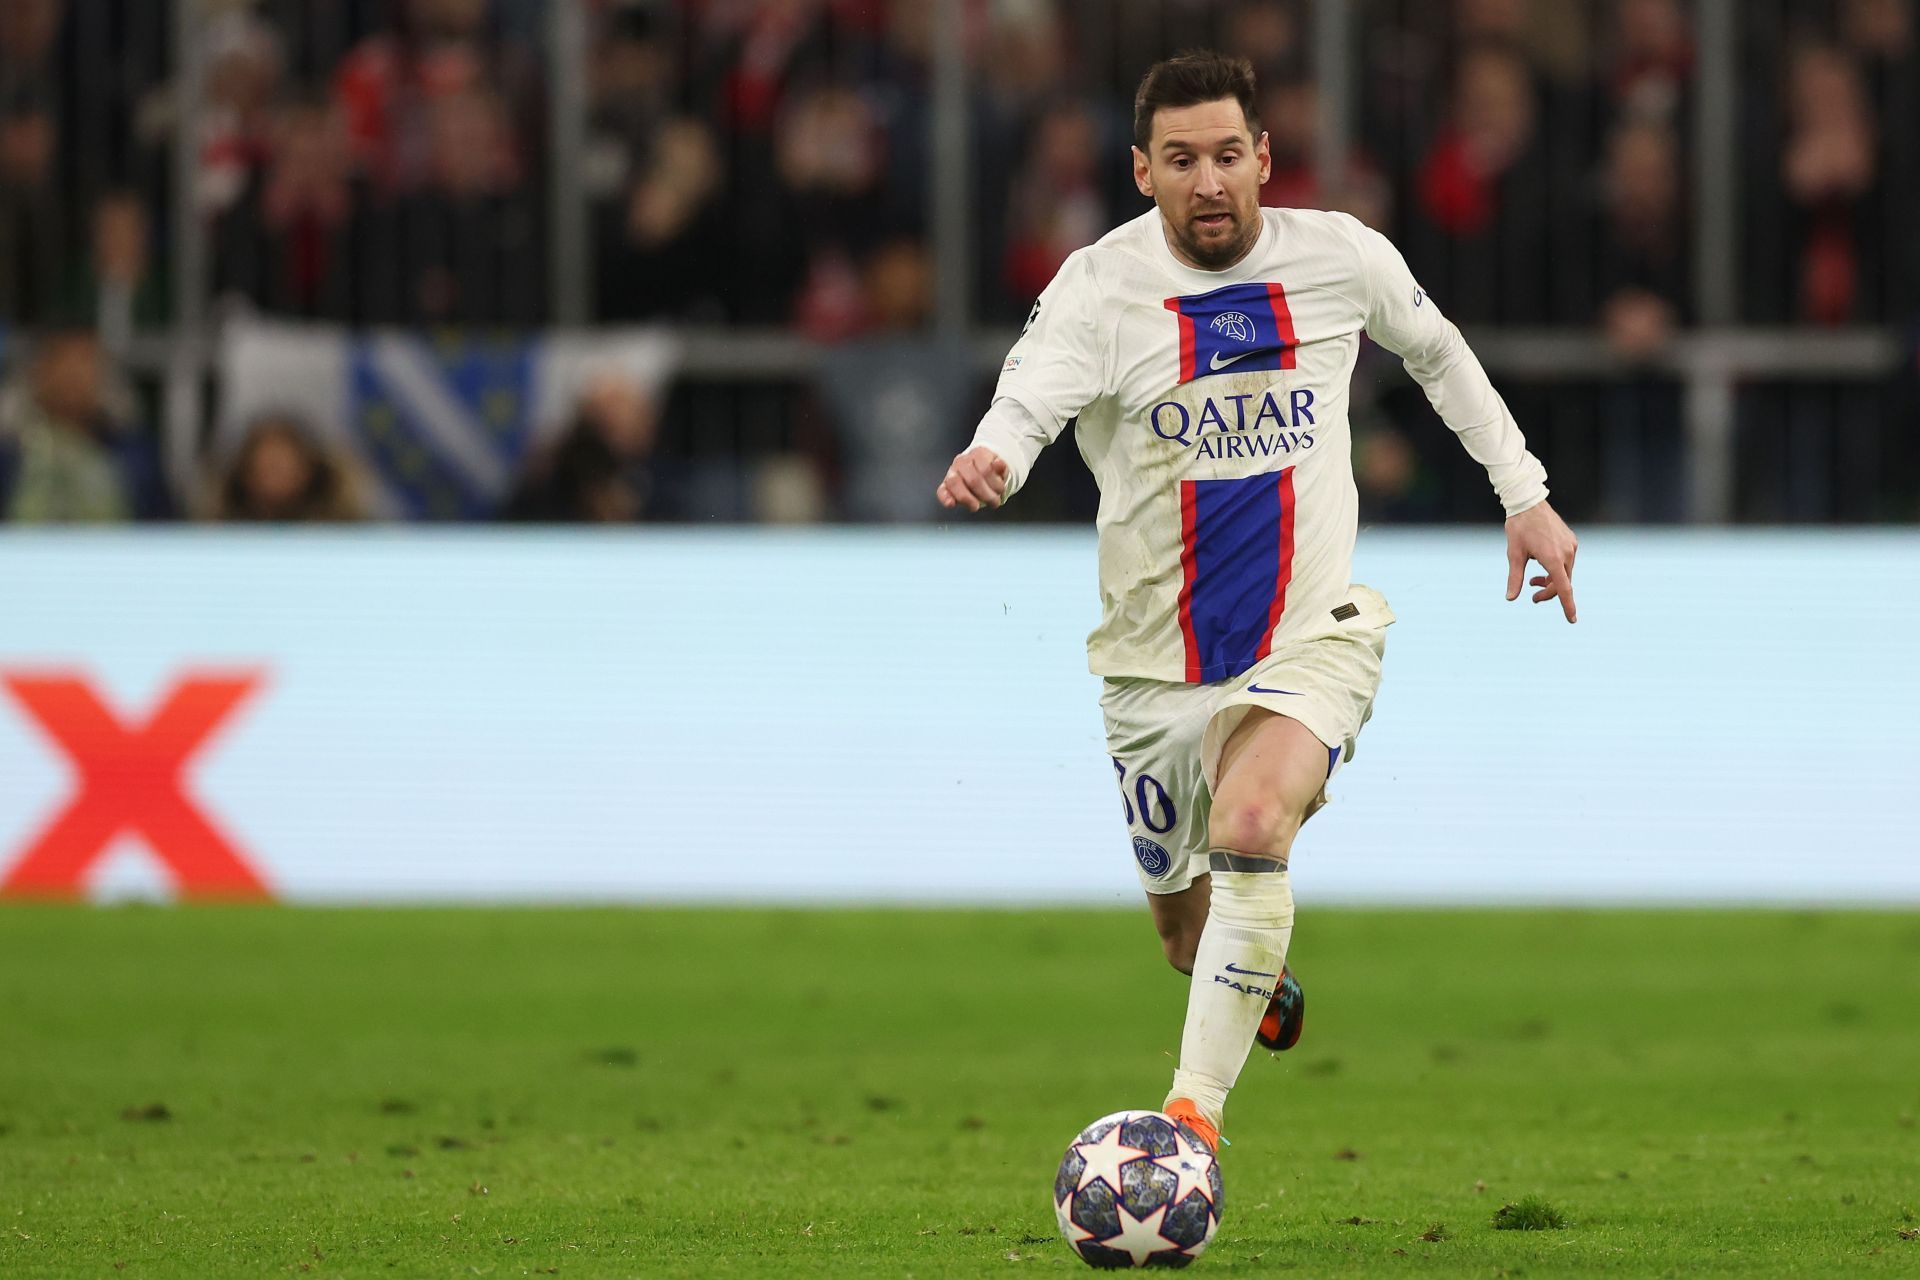 The PSG attacker has been linked with an exit from the club at the end of the season.